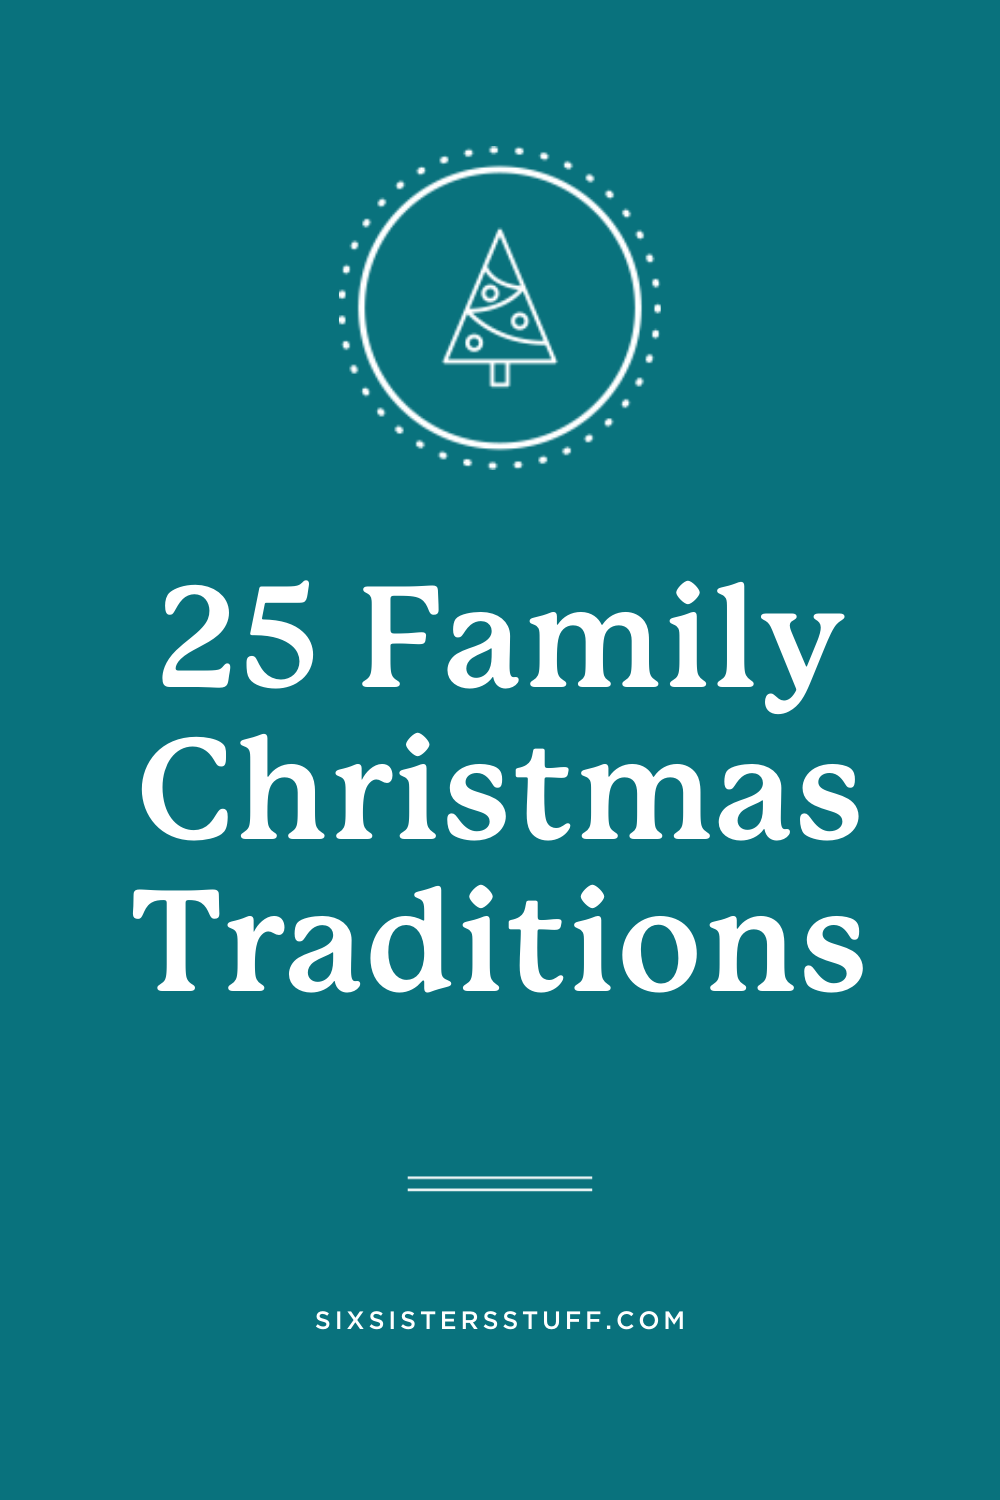 25 Family Christmas Traditions